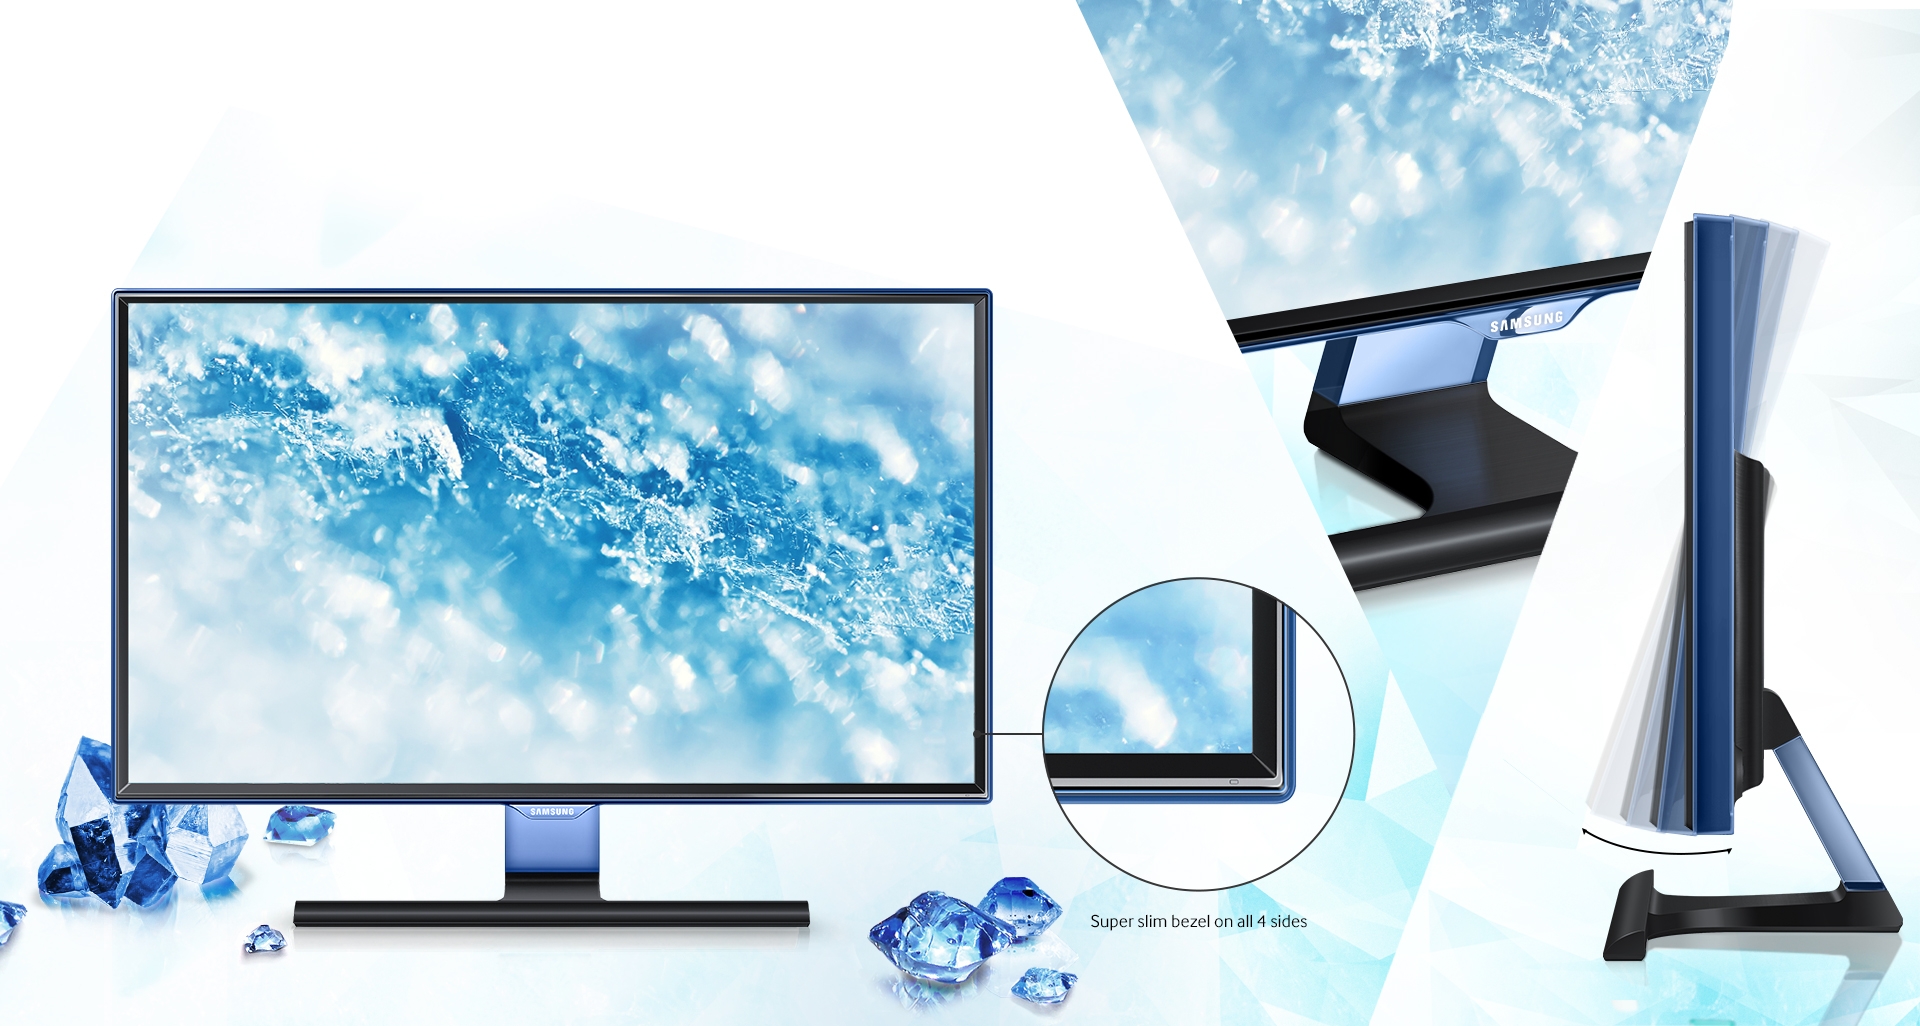 Define your space with a stylish new design accentuated by slim bezels and soft blue light